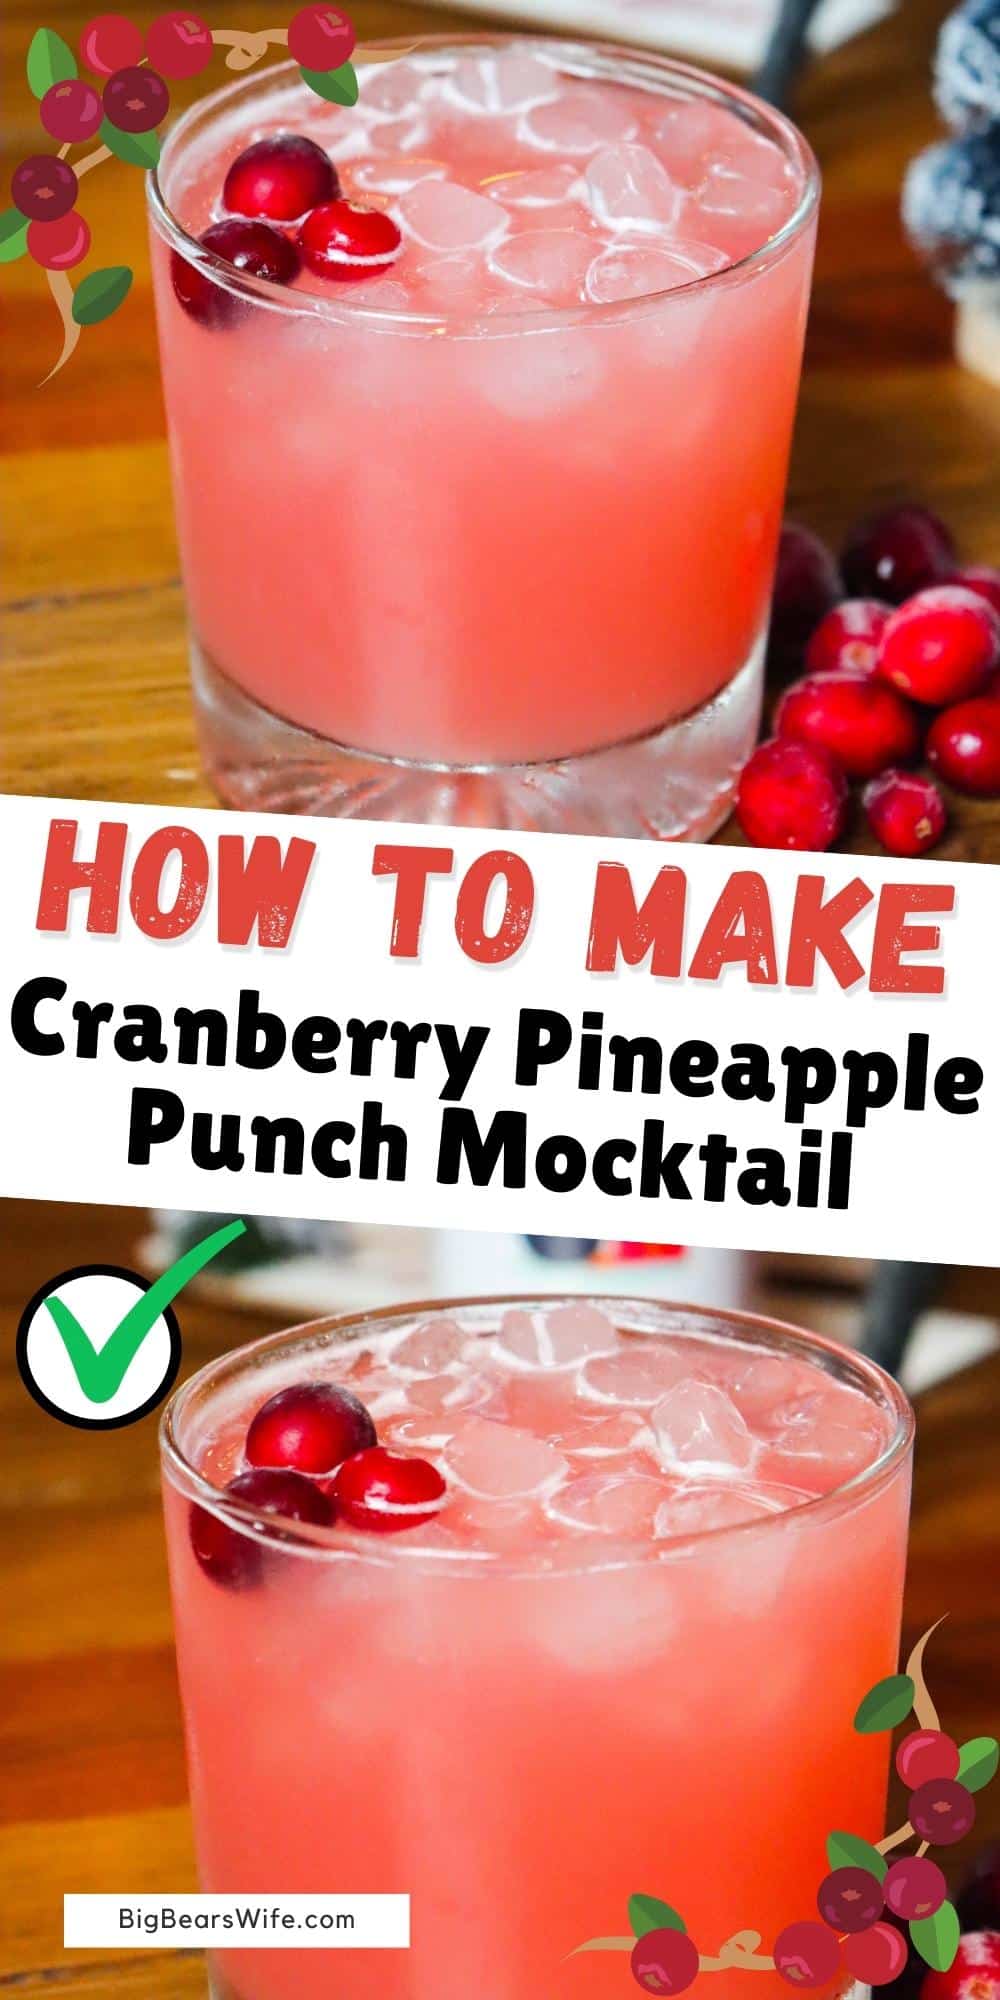 This delicious Cranberry Pineapple Punch Mocktail is such a wonderful mocktail to serve any brunch or holiday party! Both kids and adults alike will like sipping on this beautiful beverage!  via @bigbearswife